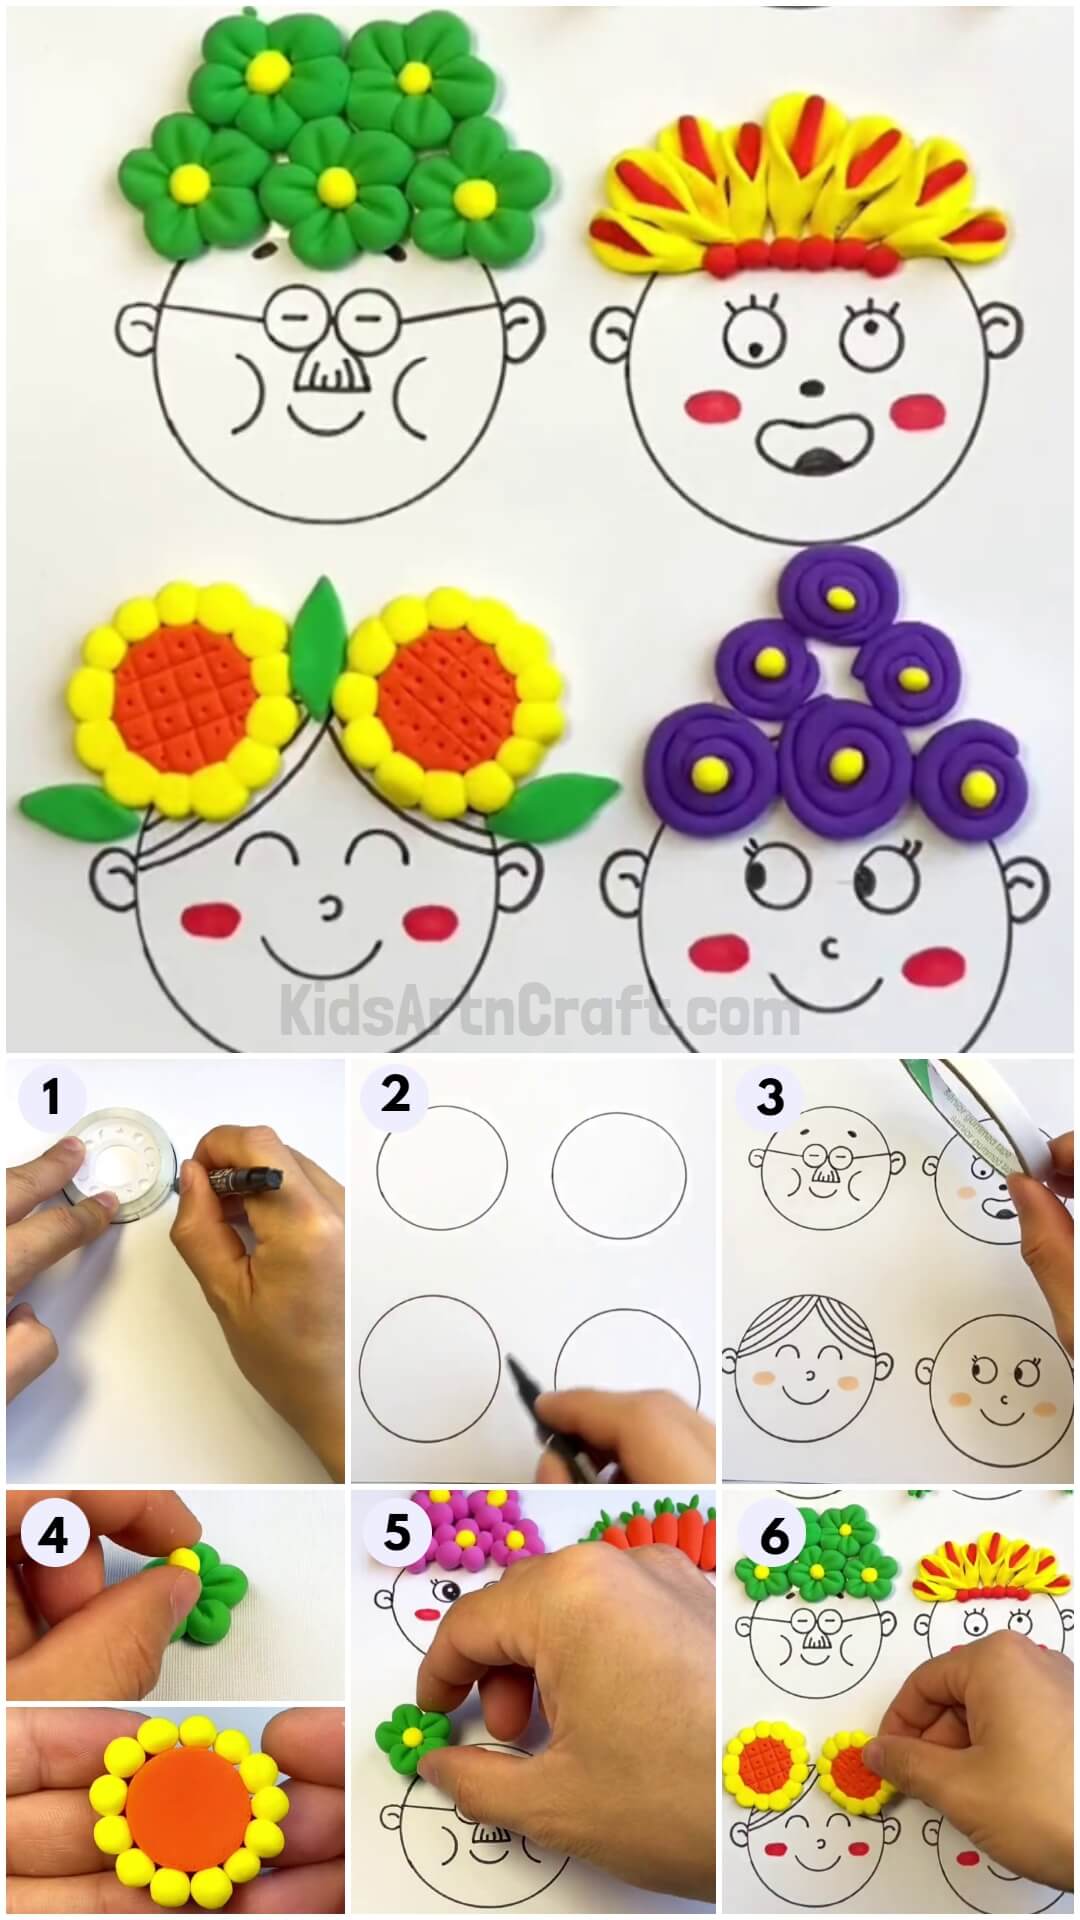 Awesome Face Clay Decoration Step-by-step Tutorial